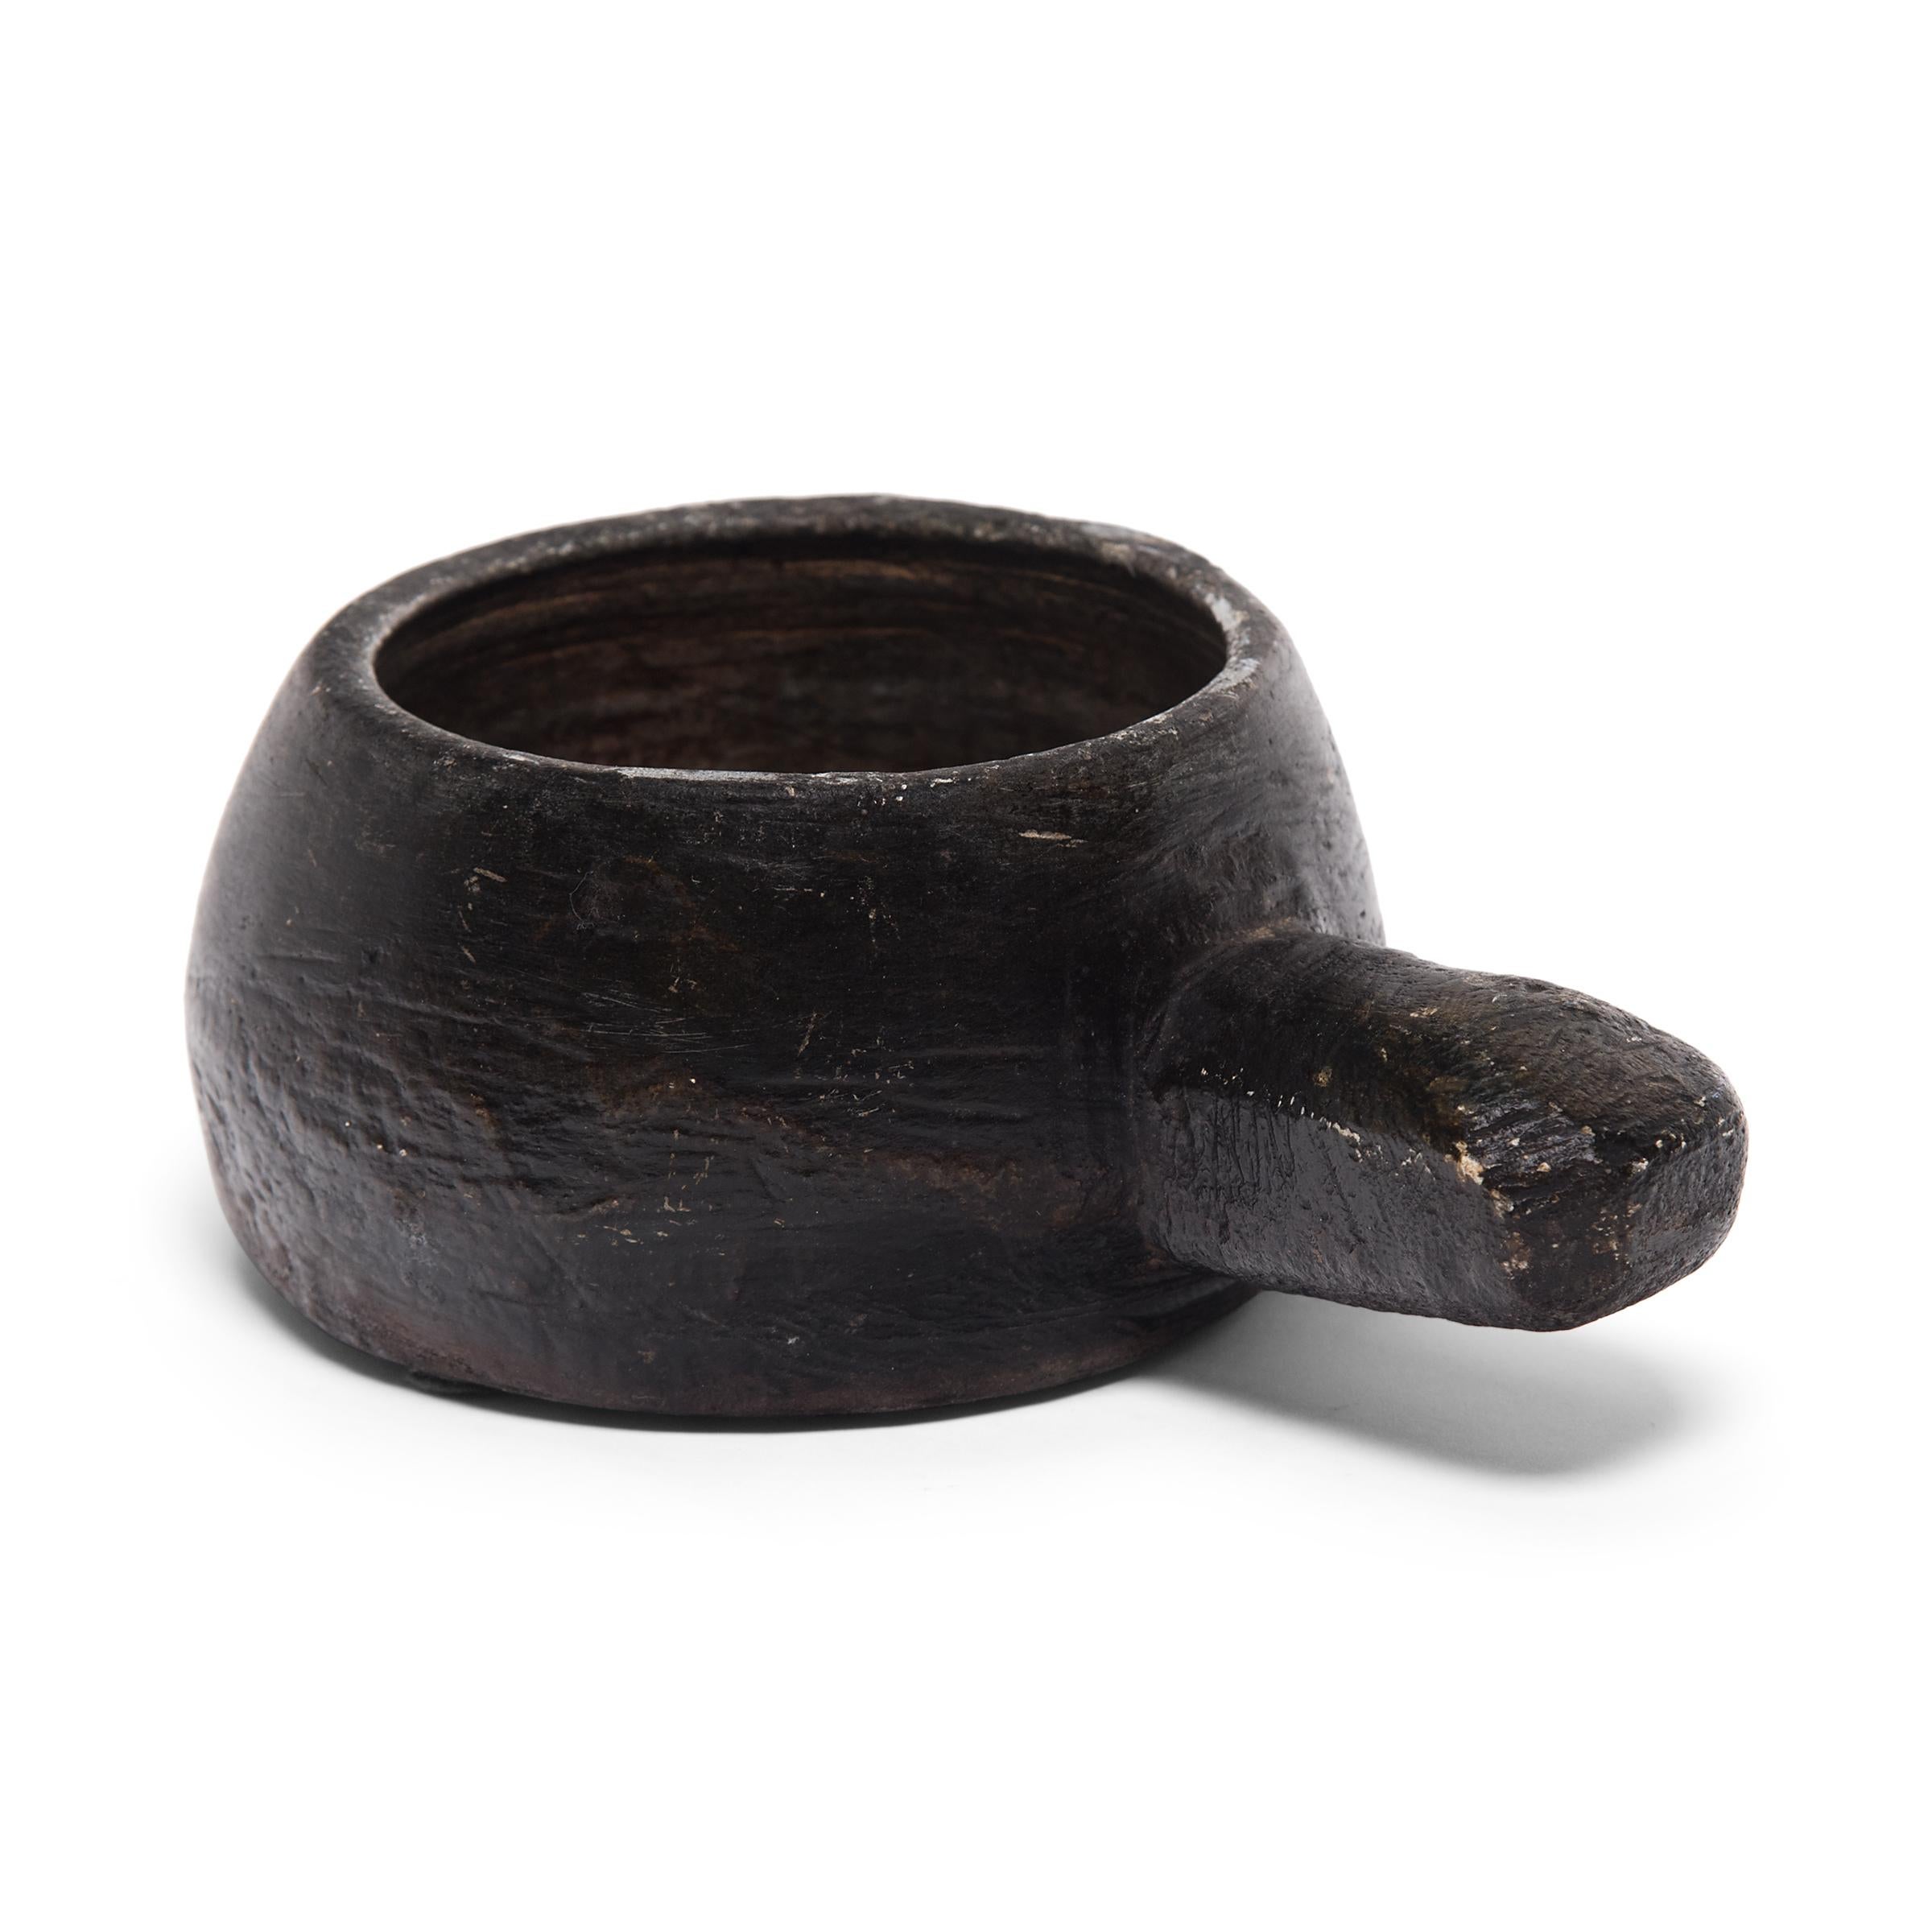 This 19th century South Korean stone mortar was originally used in a traditional apothecary. Its open bowl allowed free movement of a pestle to effectively grind, mash, and macerate herbs and seeds to prepare healing medicines. The mortar's rustic